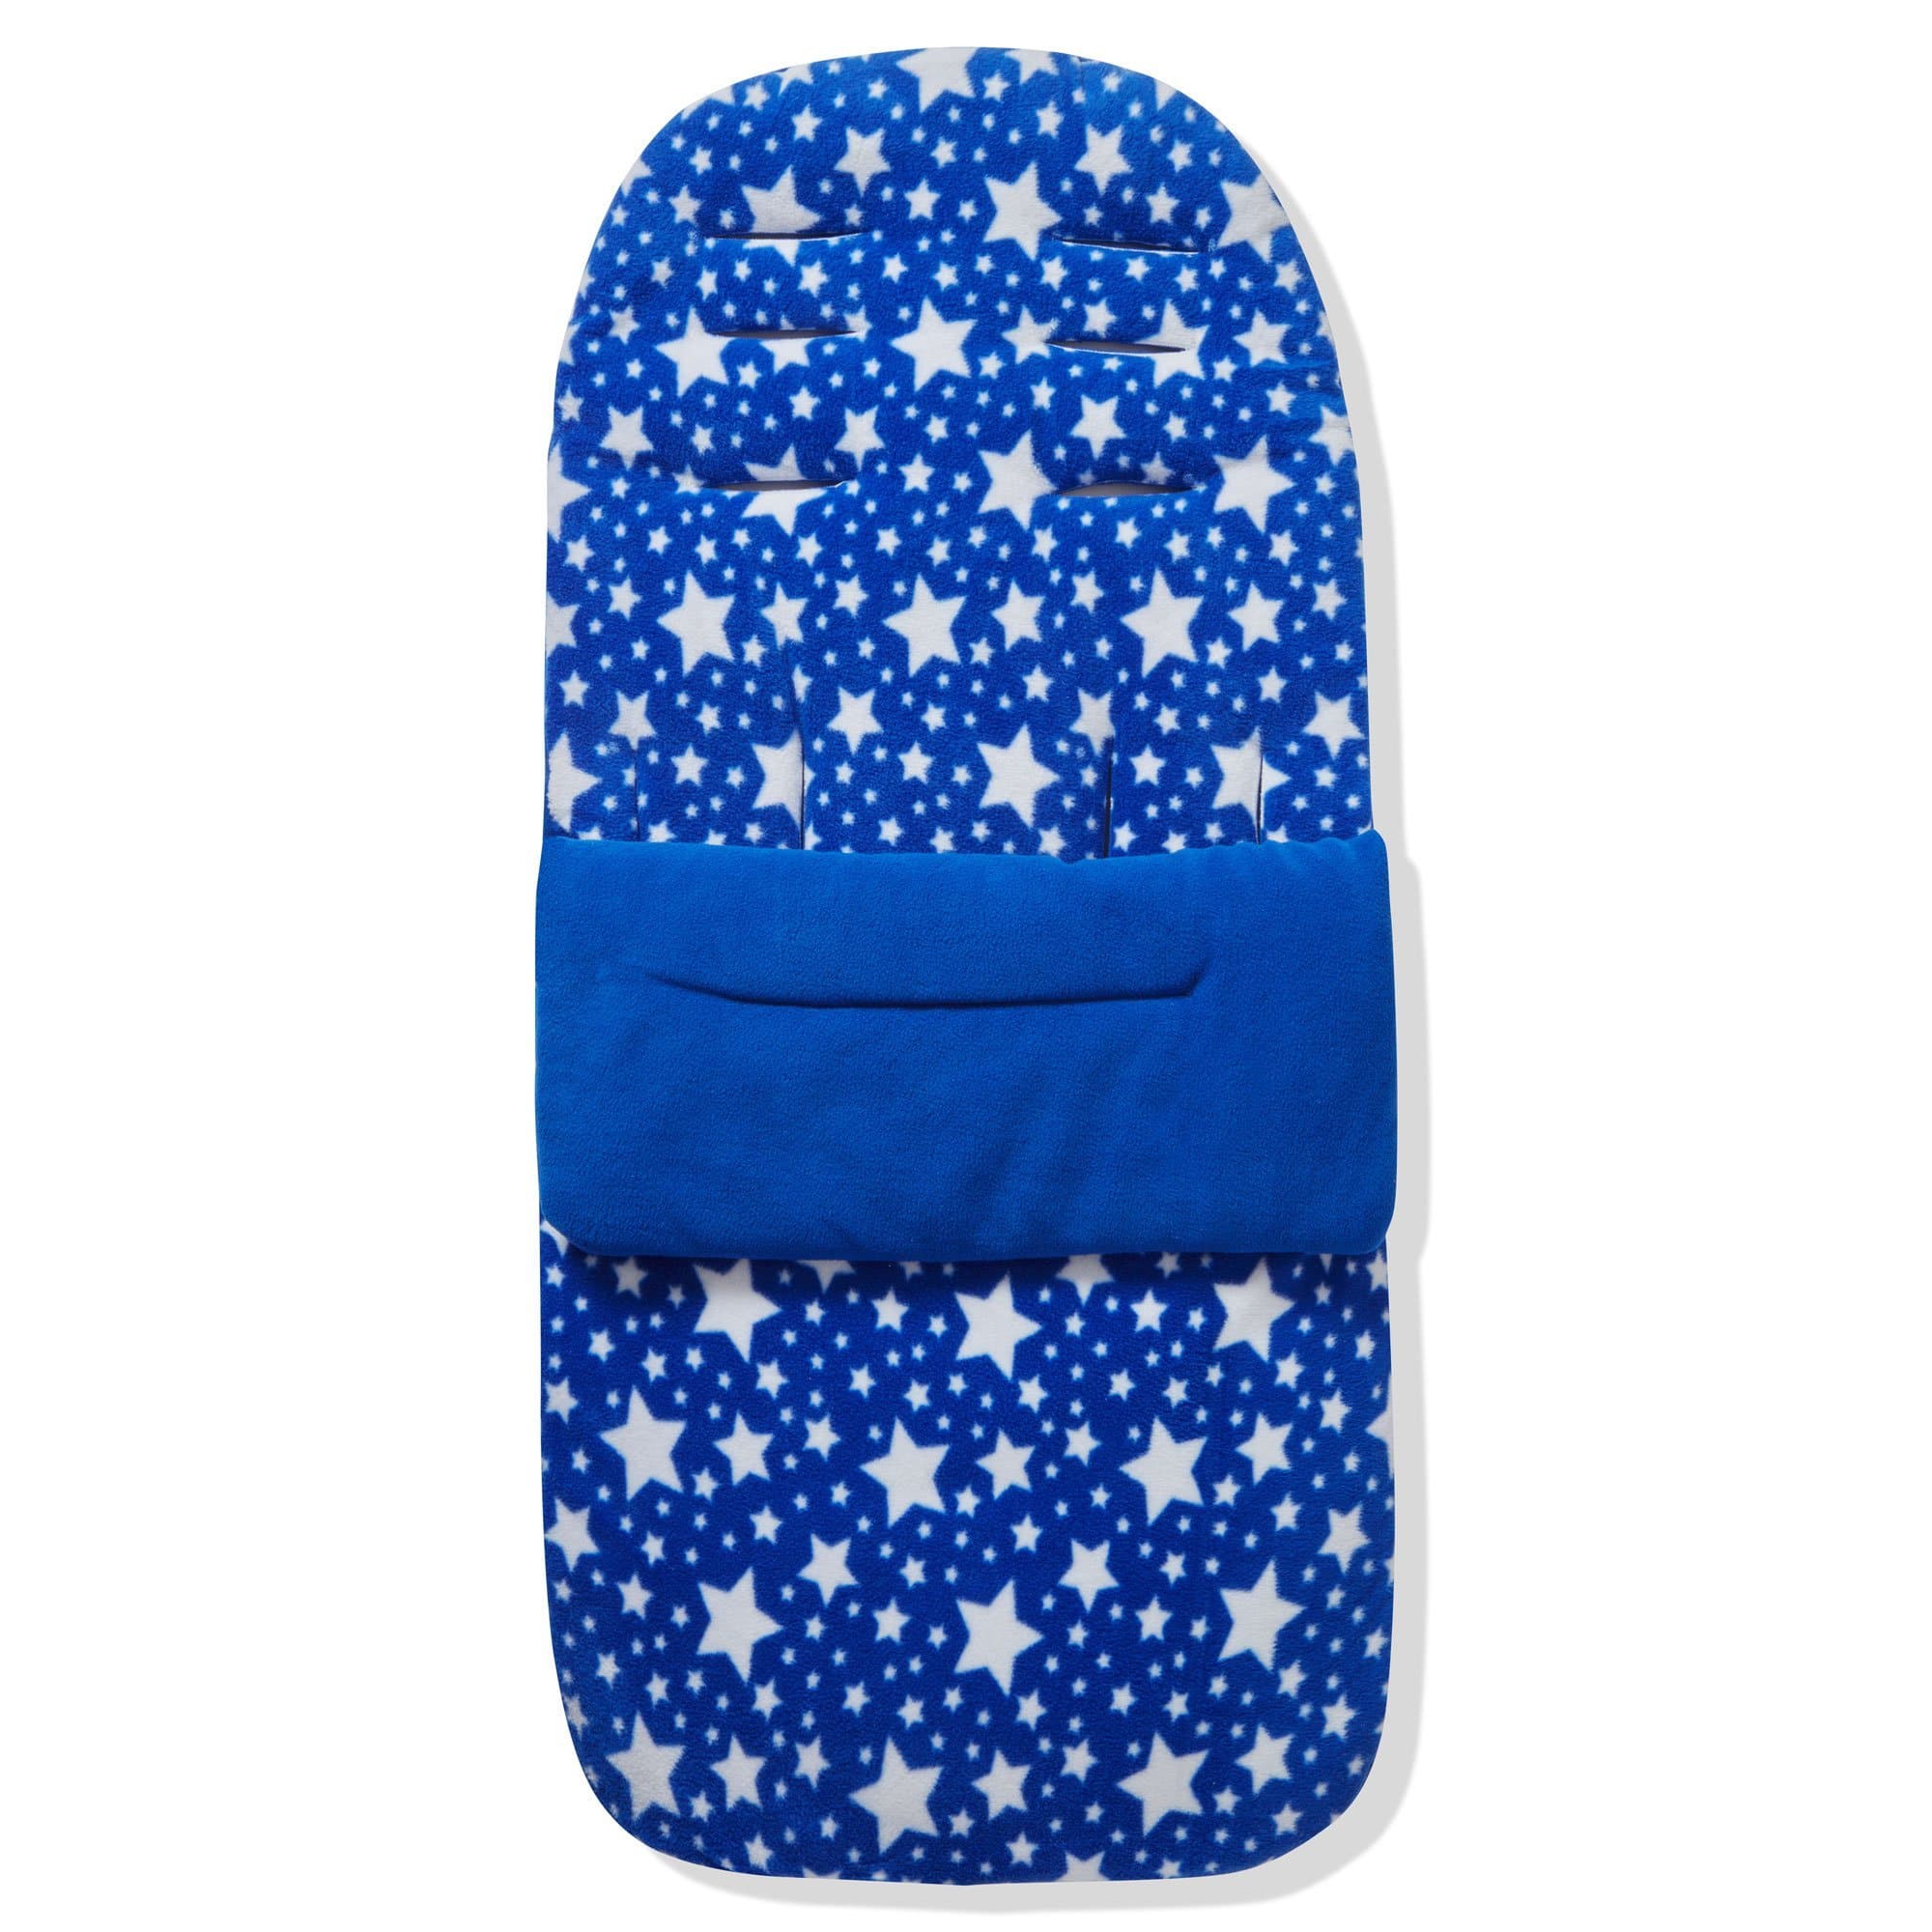 Fleece Footmuff / Cosy Toes Compatible with Unilove - Blue Star / Fits All Models | For Your Little One